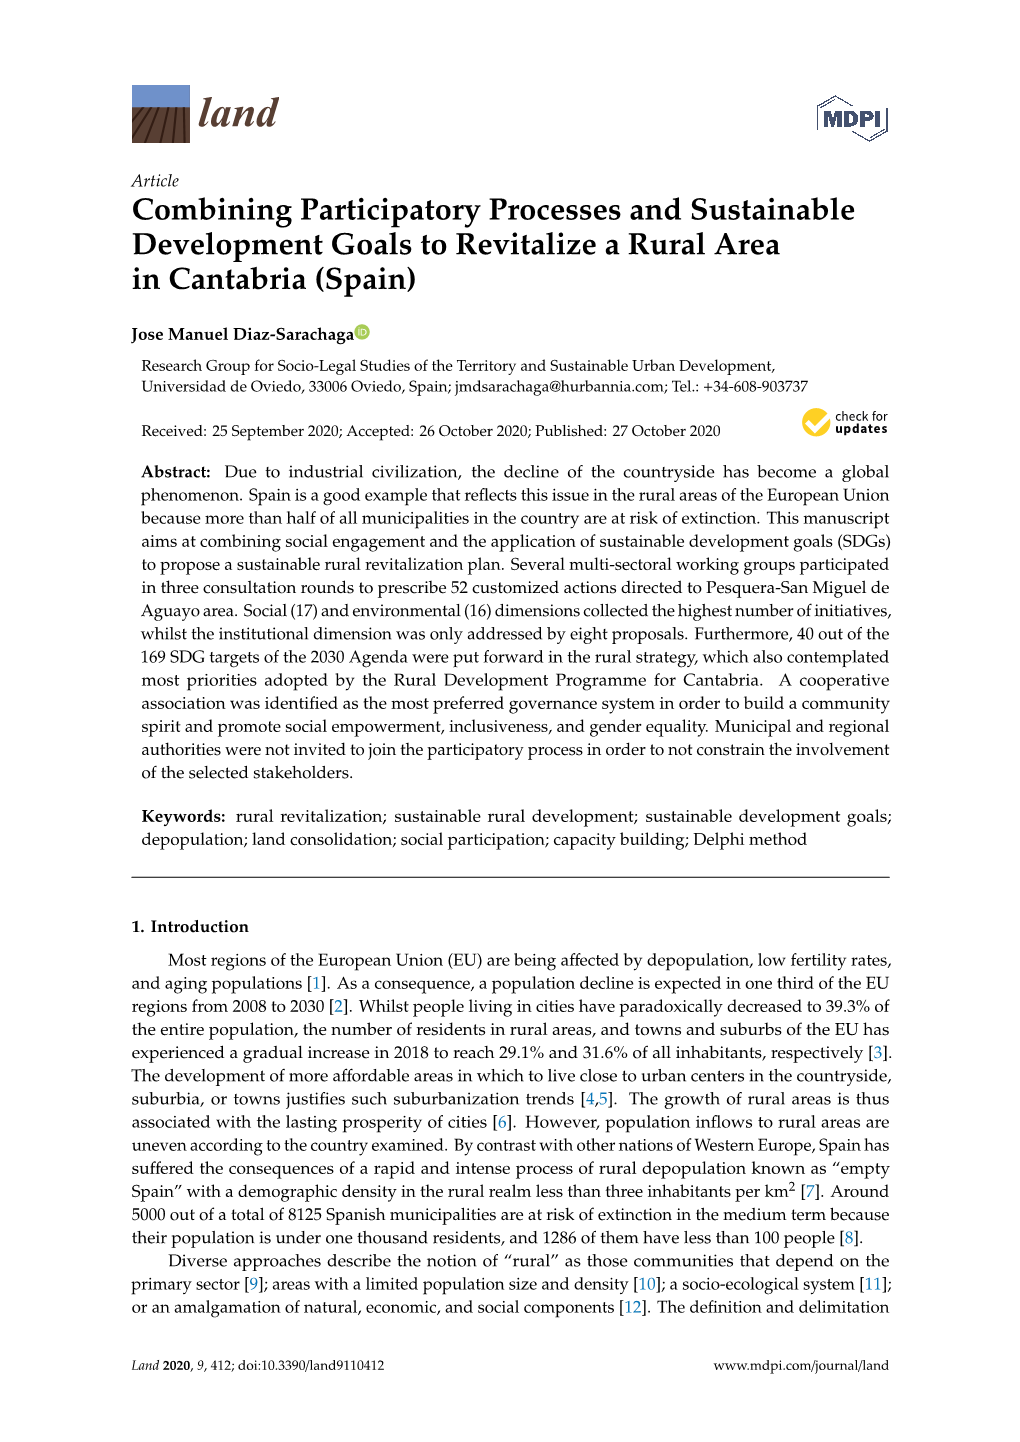 Combining Participatory Processes and Sustainable Development Goals to Revitalize a Rural Area in Cantabria (Spain)